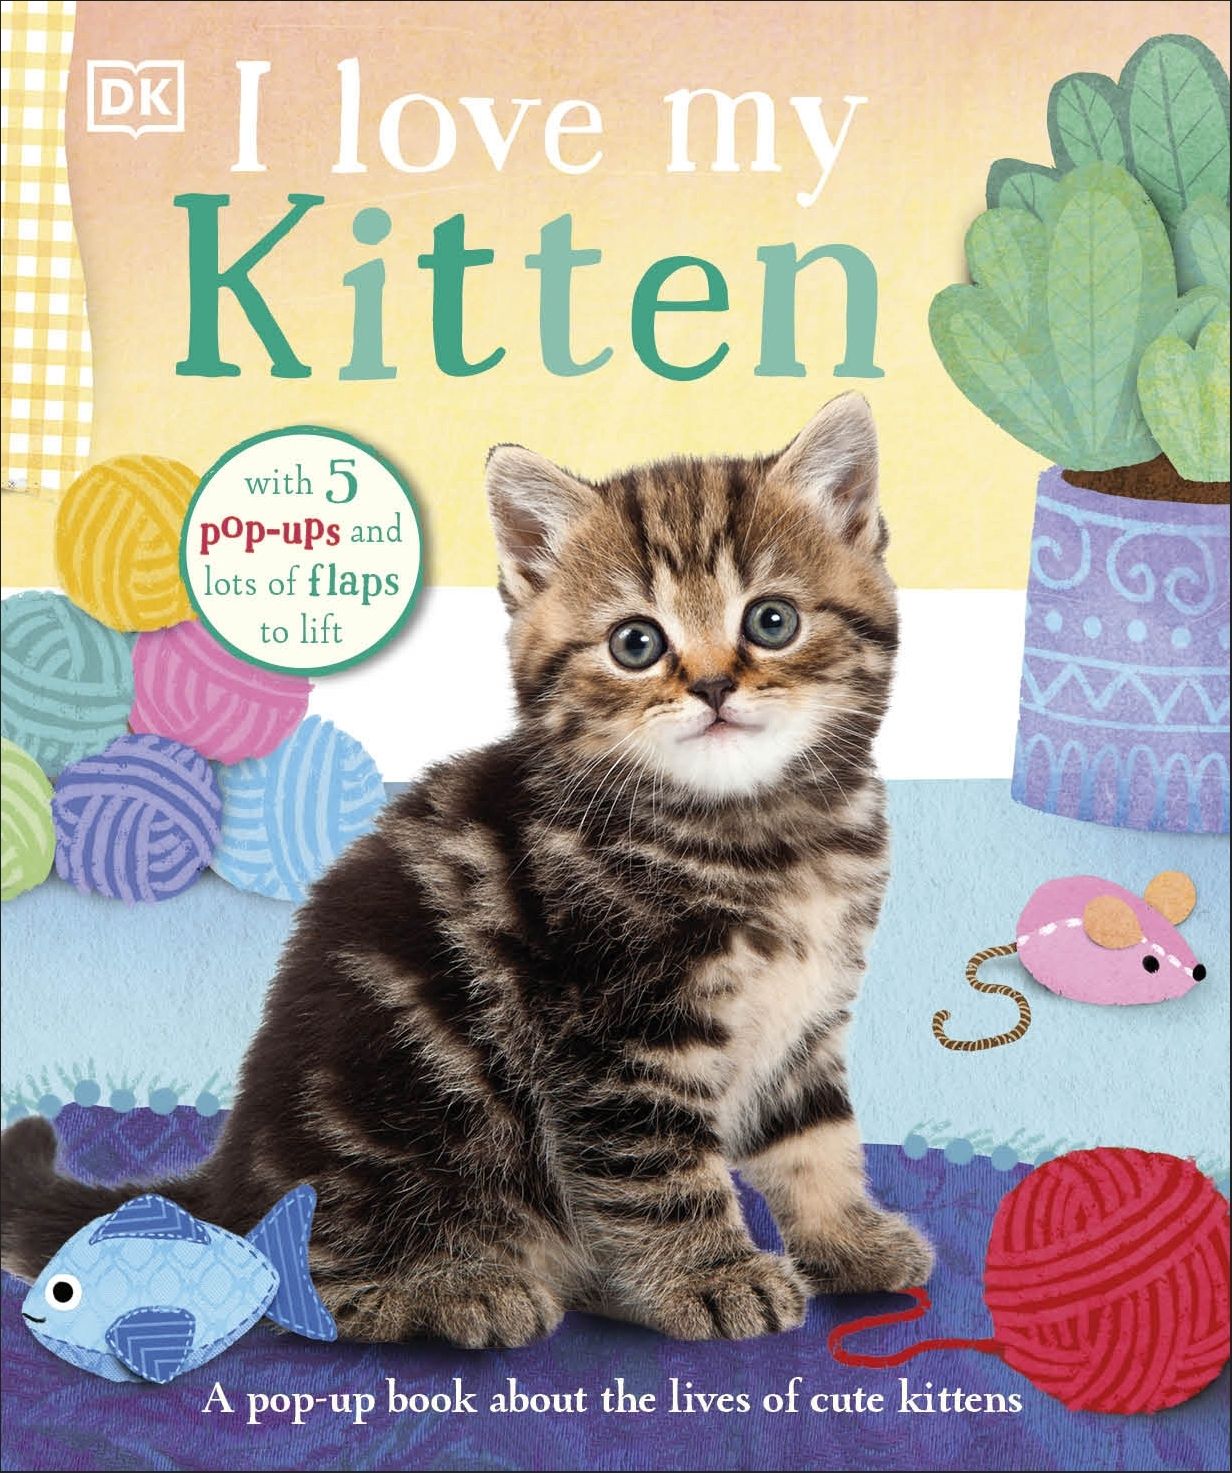 I Love My Kitten : A Pop-Up Book About the Lives of Cute Kittens